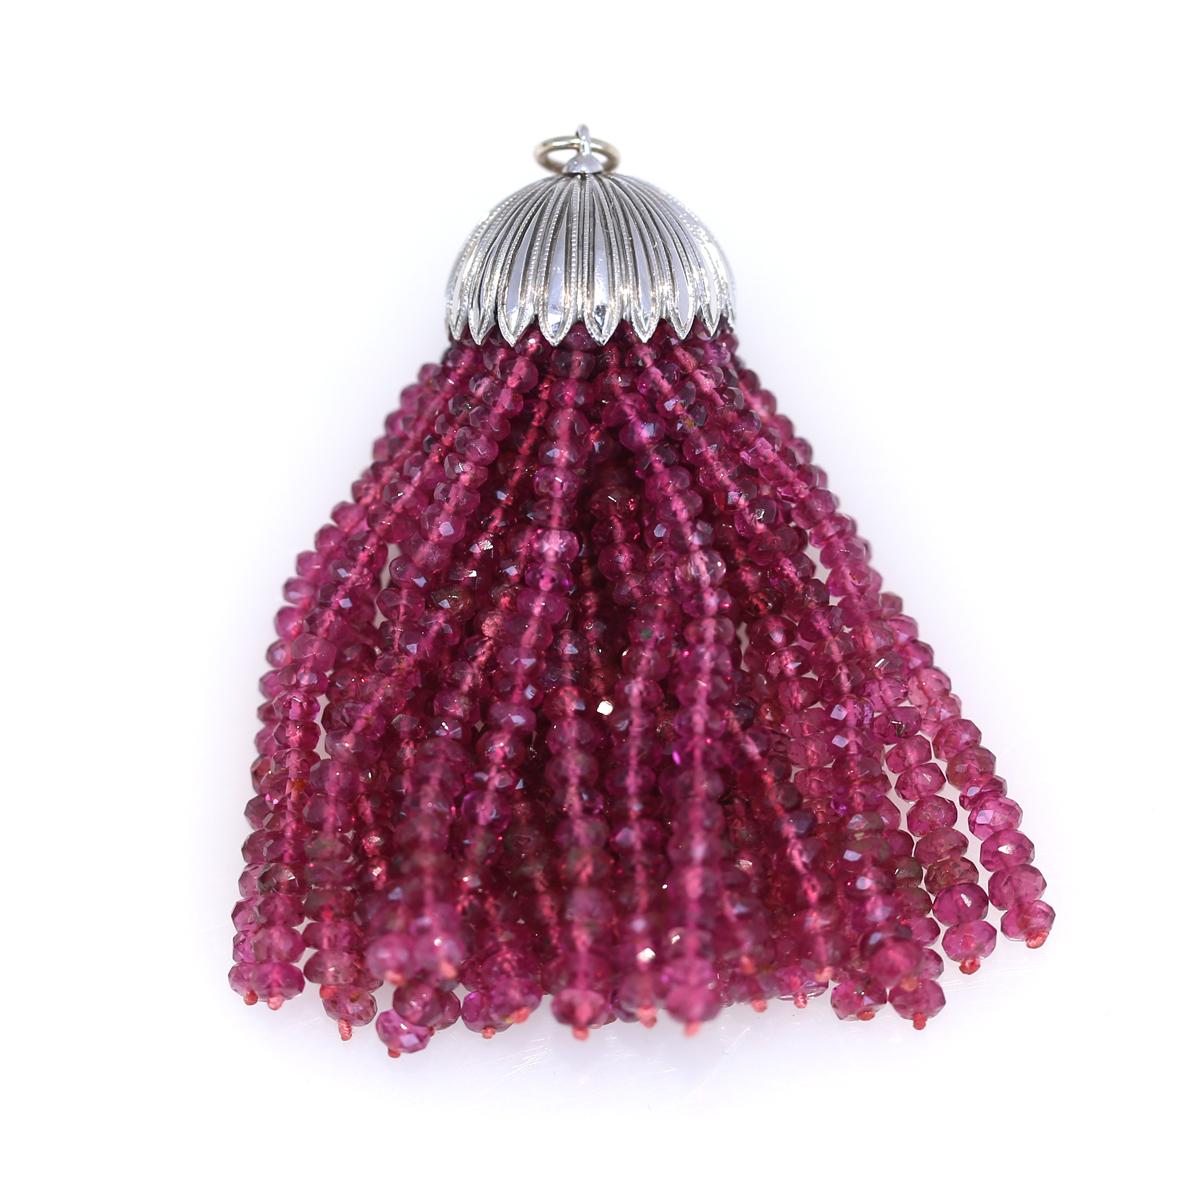 Rubies Beads Pendant Gold Platinum, 1920 In Good Condition For Sale In Herzelia, Tel Aviv